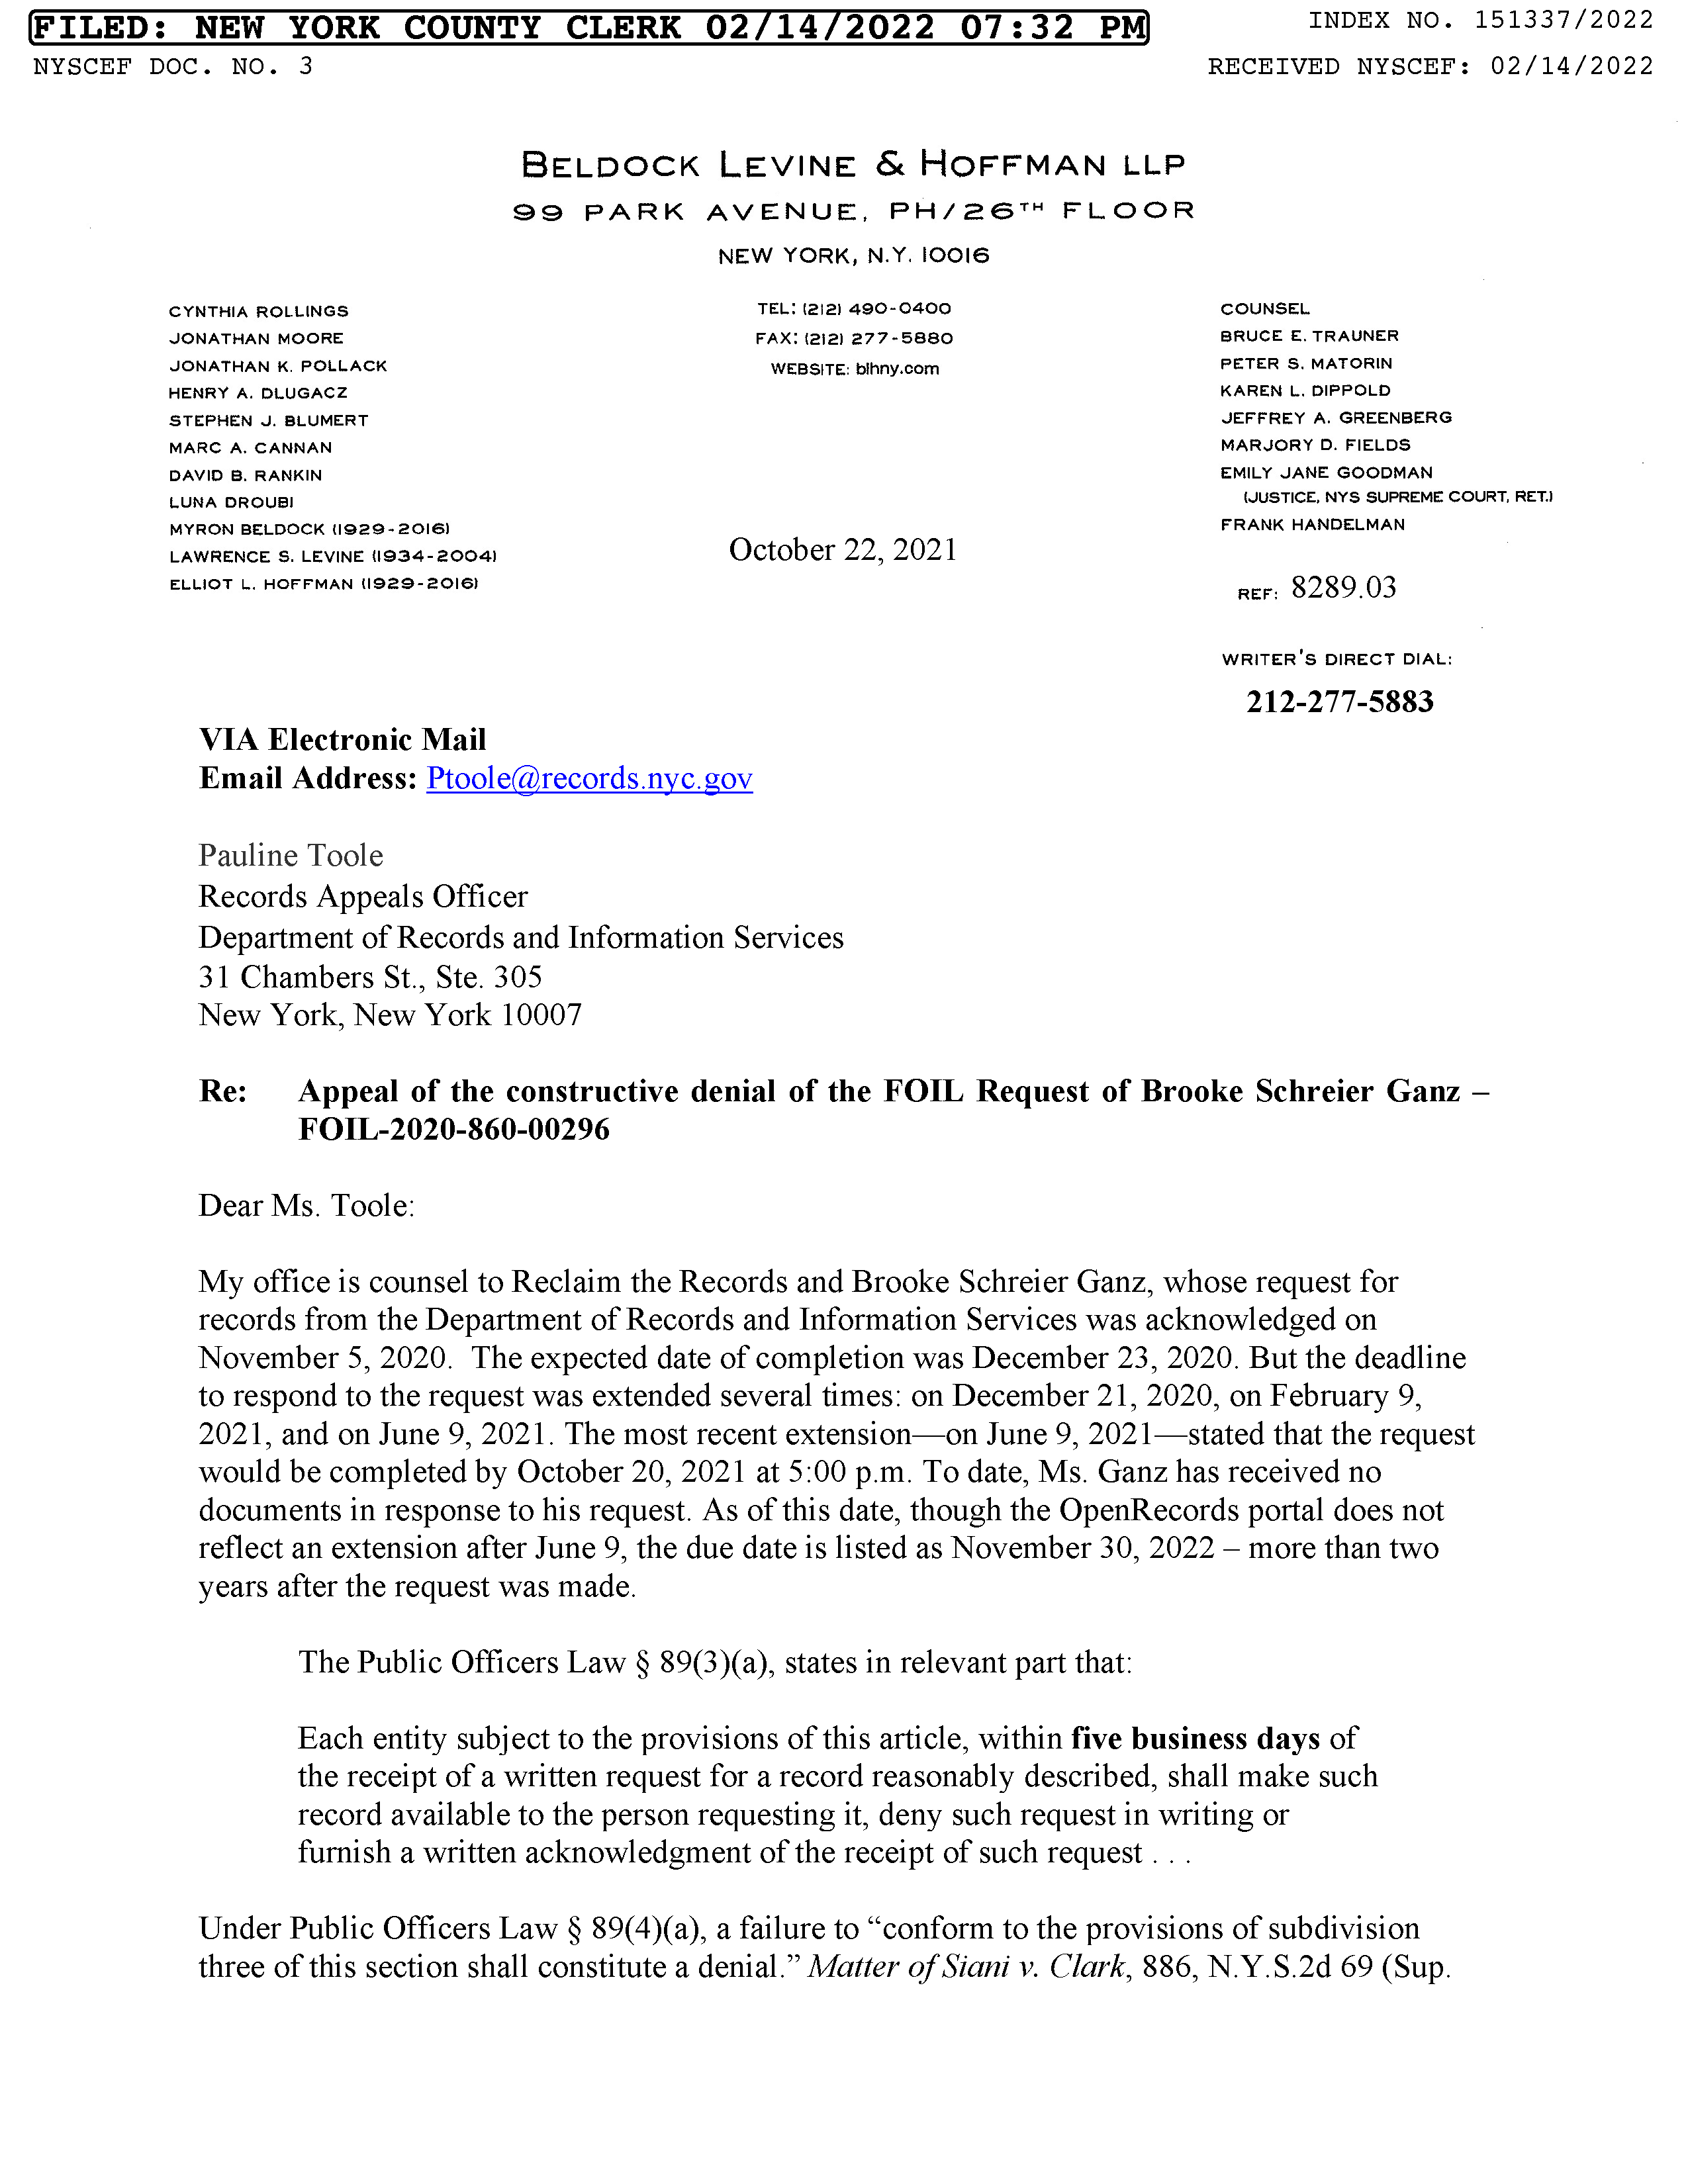 Our official FOIL Appeal (October 22, 2021)